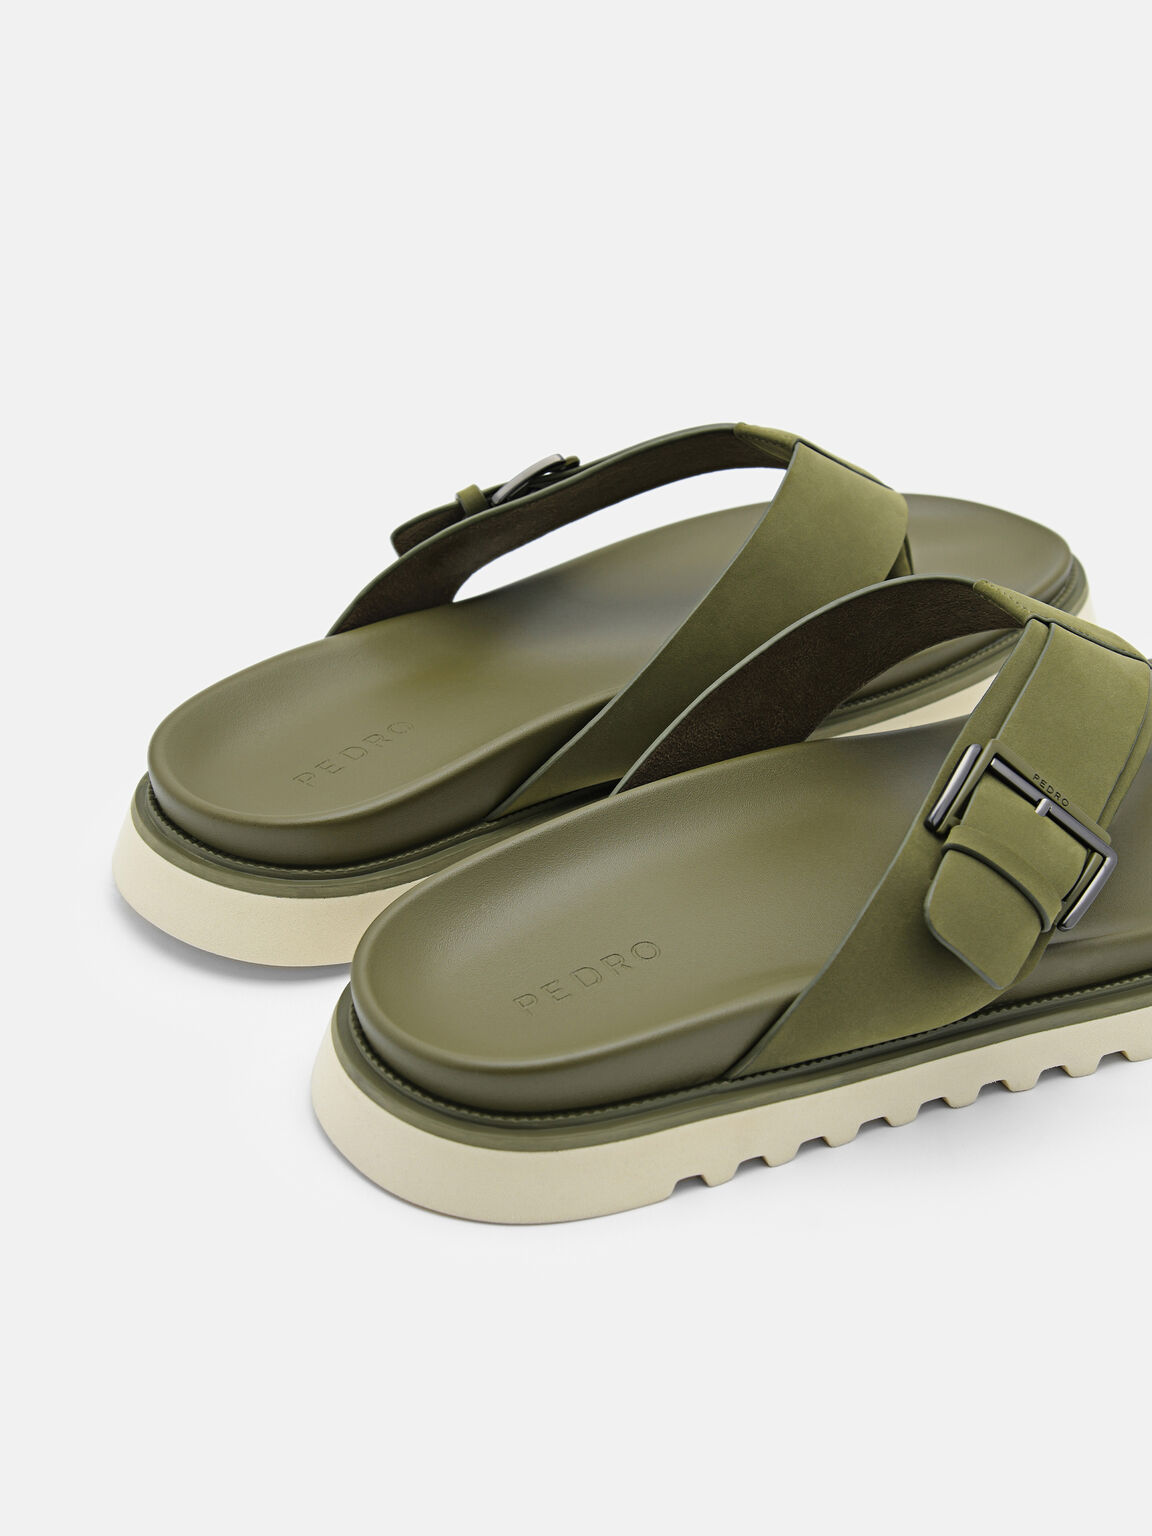 Arche Thong Sandals, Military Green